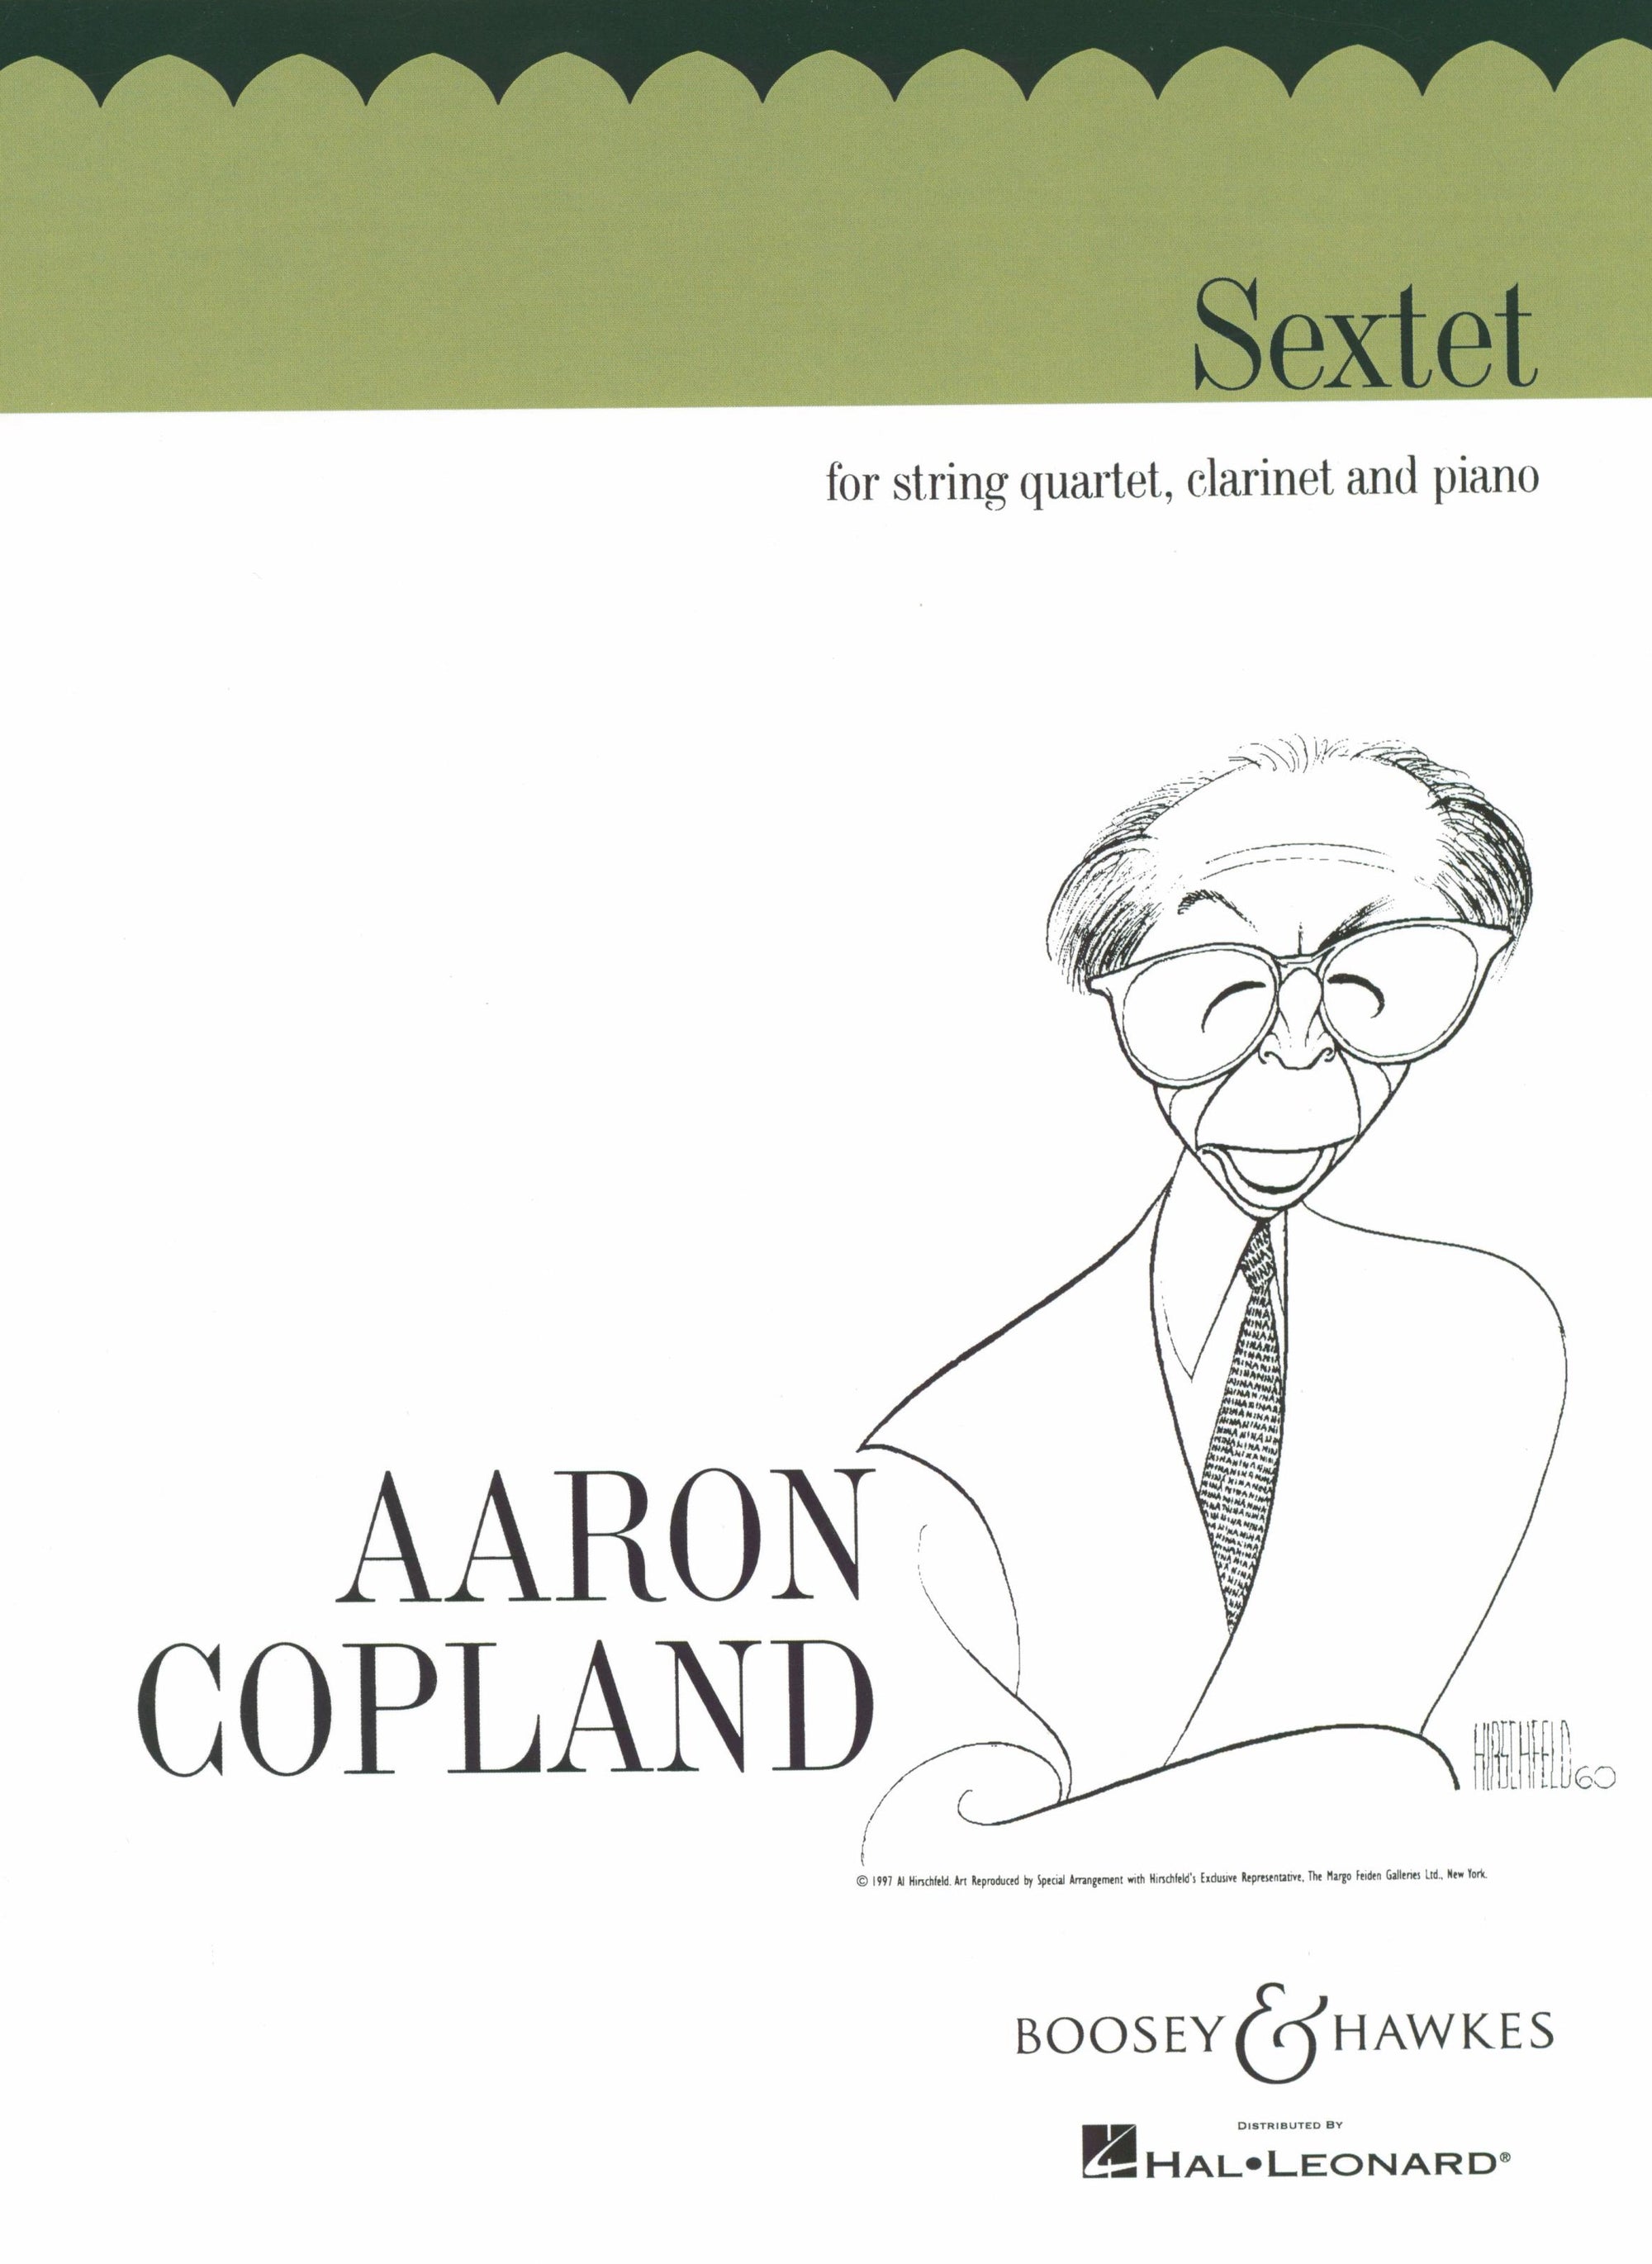 Copland: Sextet for String Quartet, Clarinet and Piano